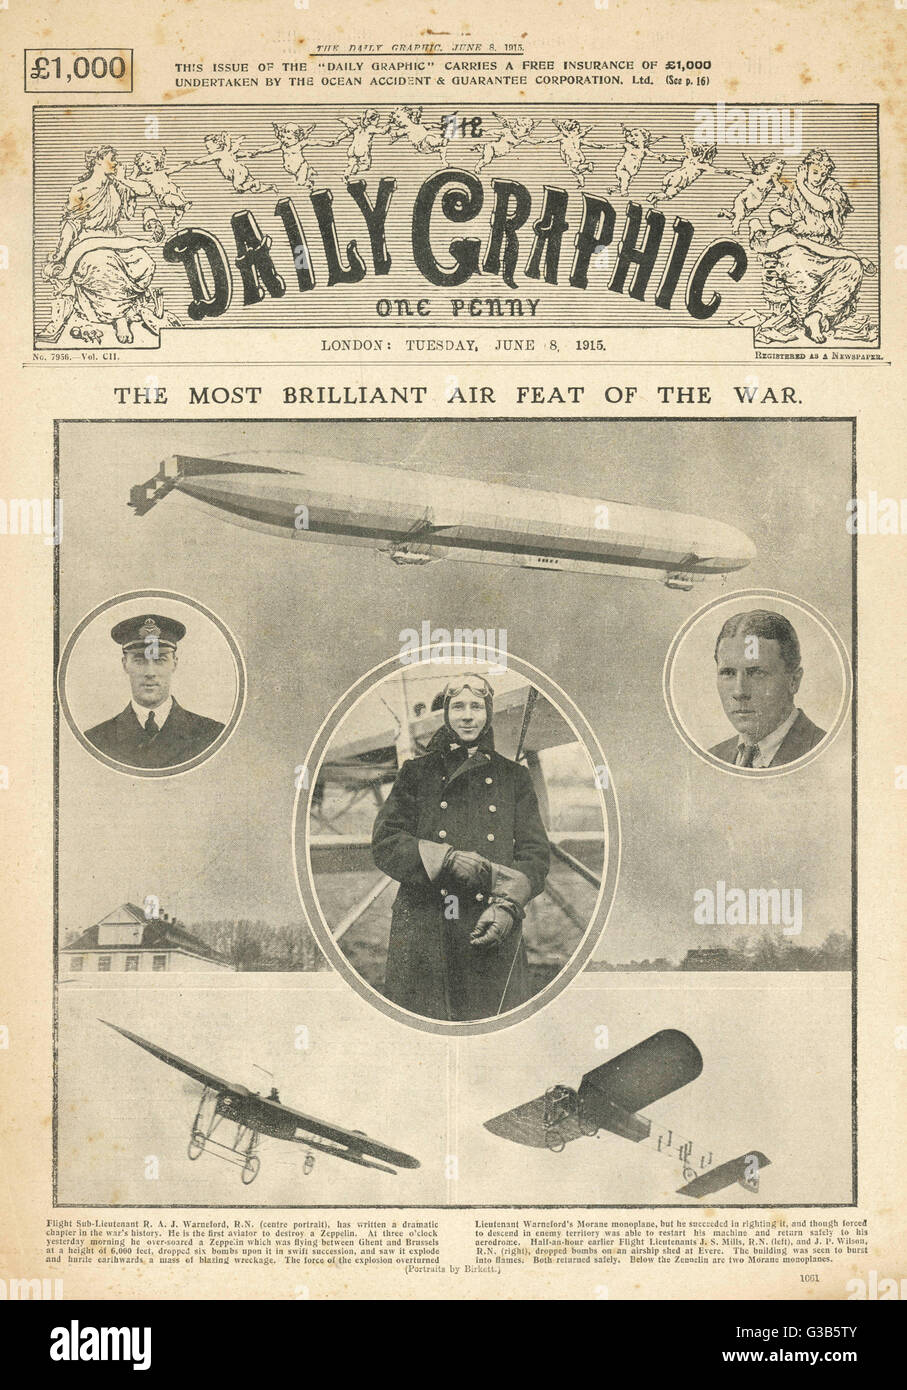 Front page of the DAILY  GRAPHIC bringing readers  news  of 'the most brilliant air  feat of the war' - the downing  of a dreaded Zeppelin.      Date: 8 July 1915 Stock Photo